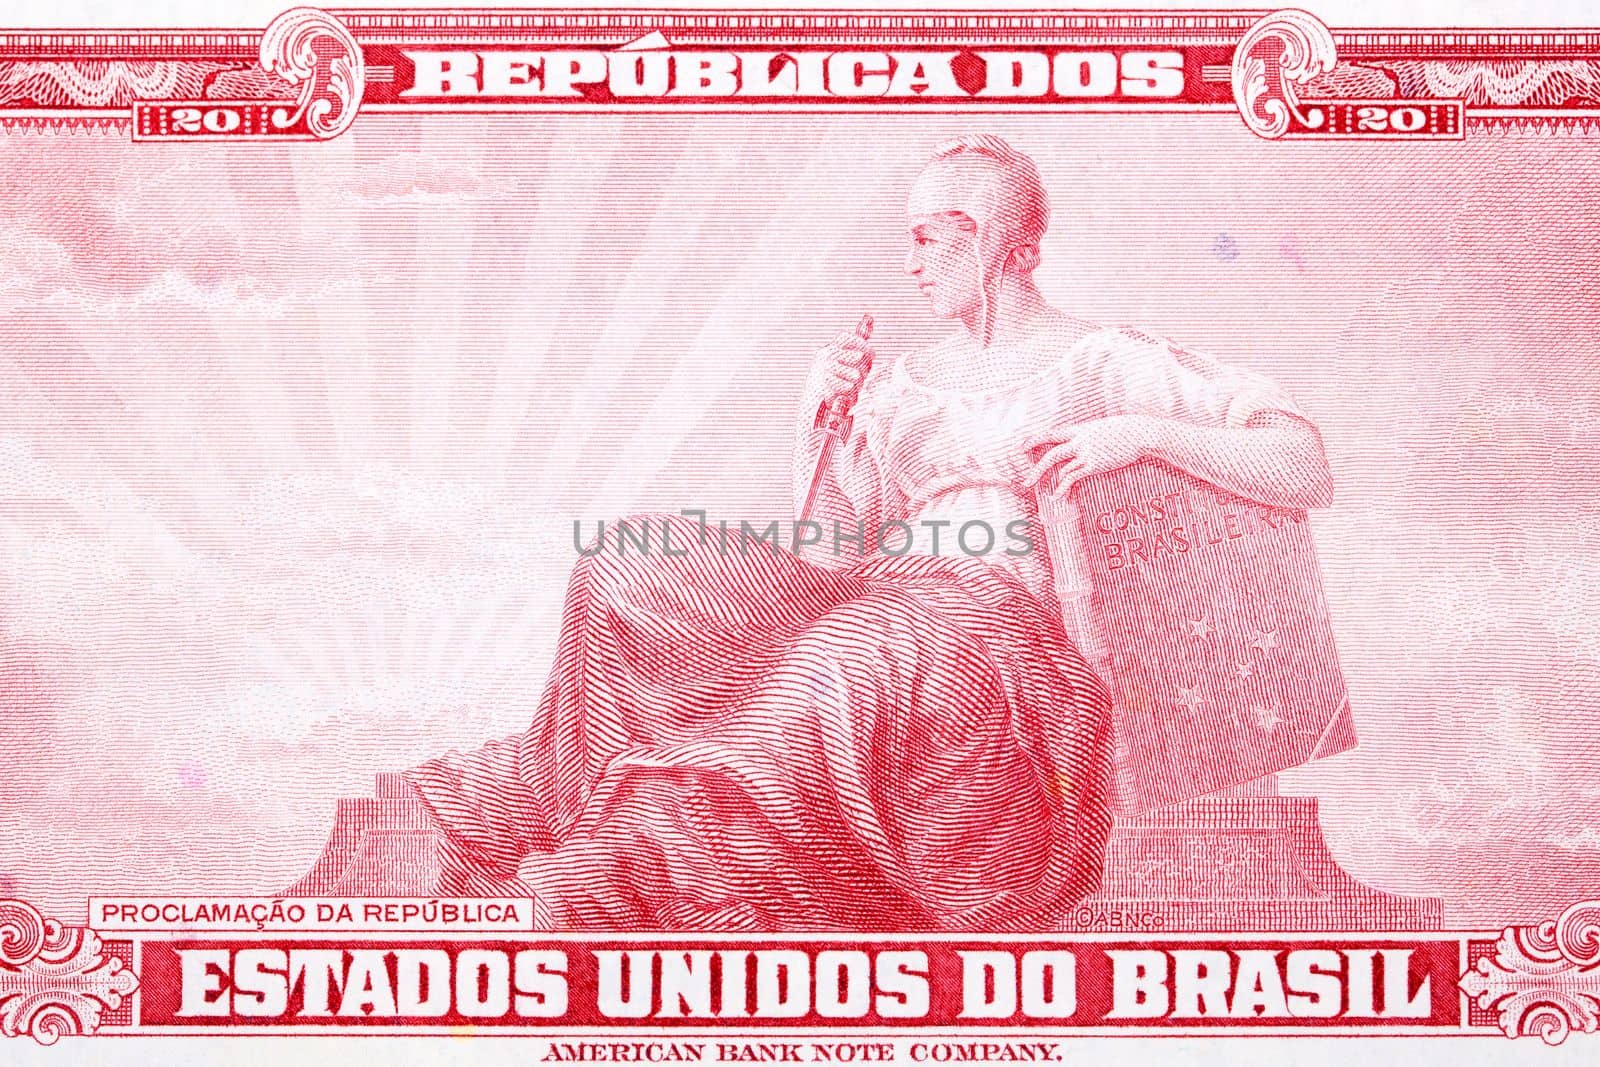 Allegory of the Republic from old Brazilian money